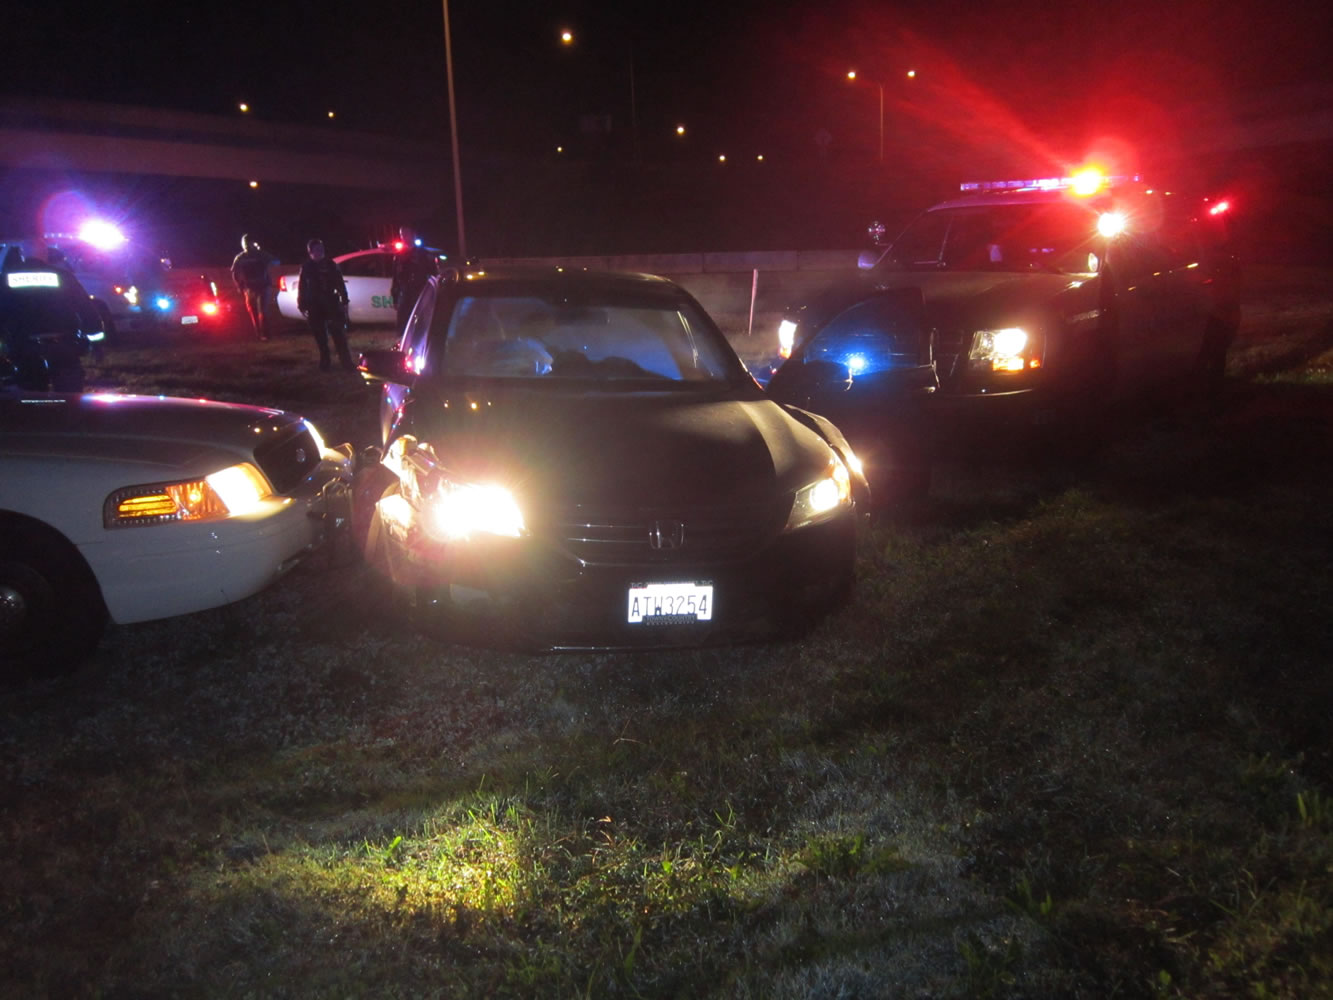 A reportedly stolen Honda is hemmed in by patrol cars after a pursuit ended near the Interstate 5 bridge.